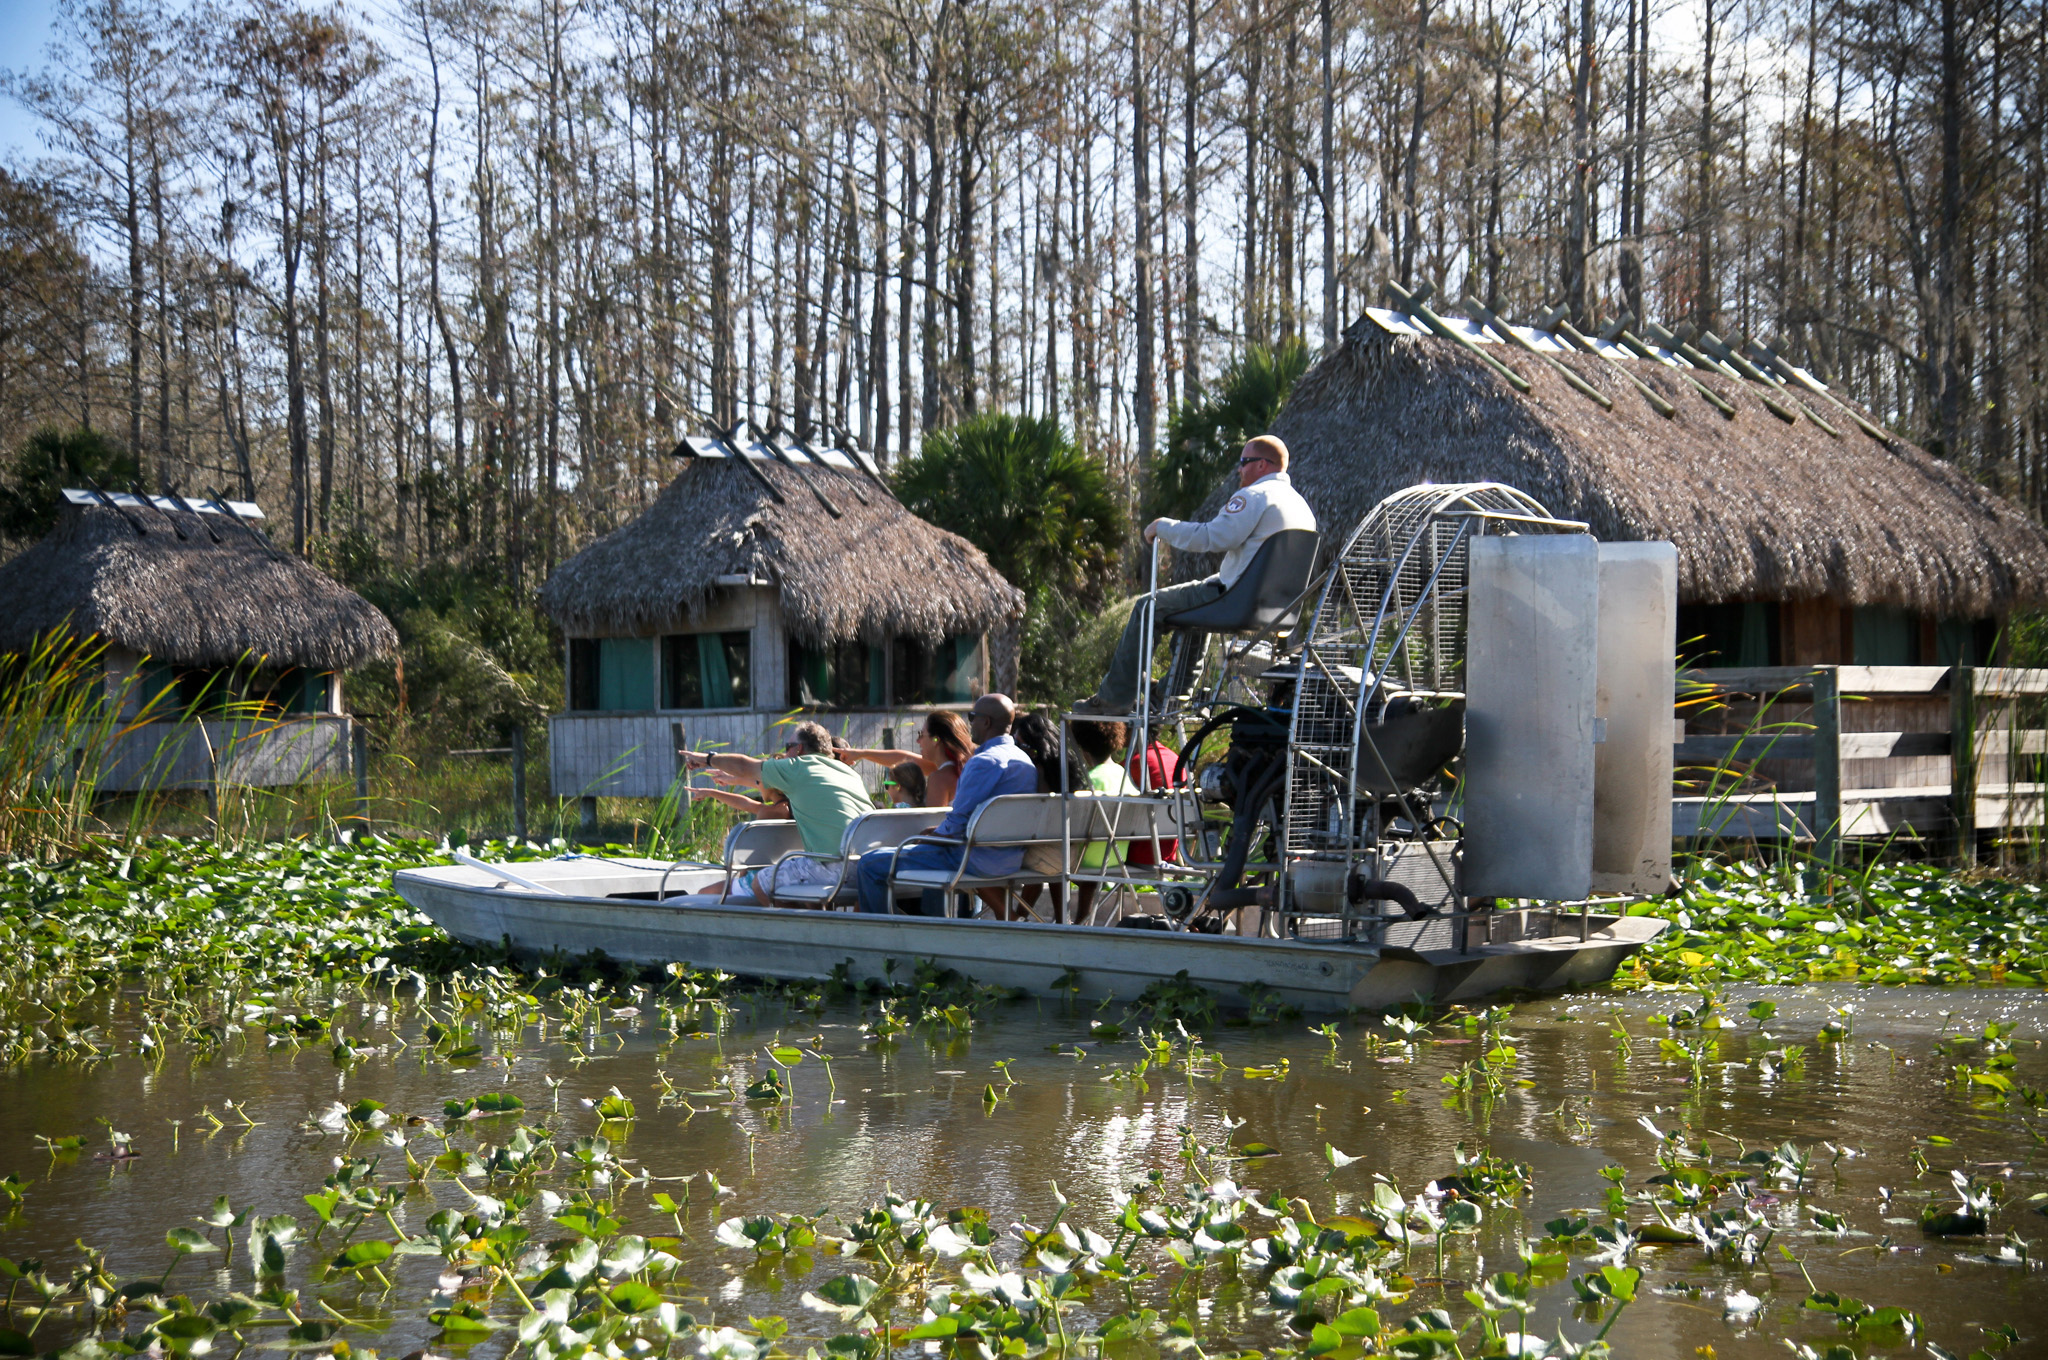 Best Airboat Ride in the Florida Everglades